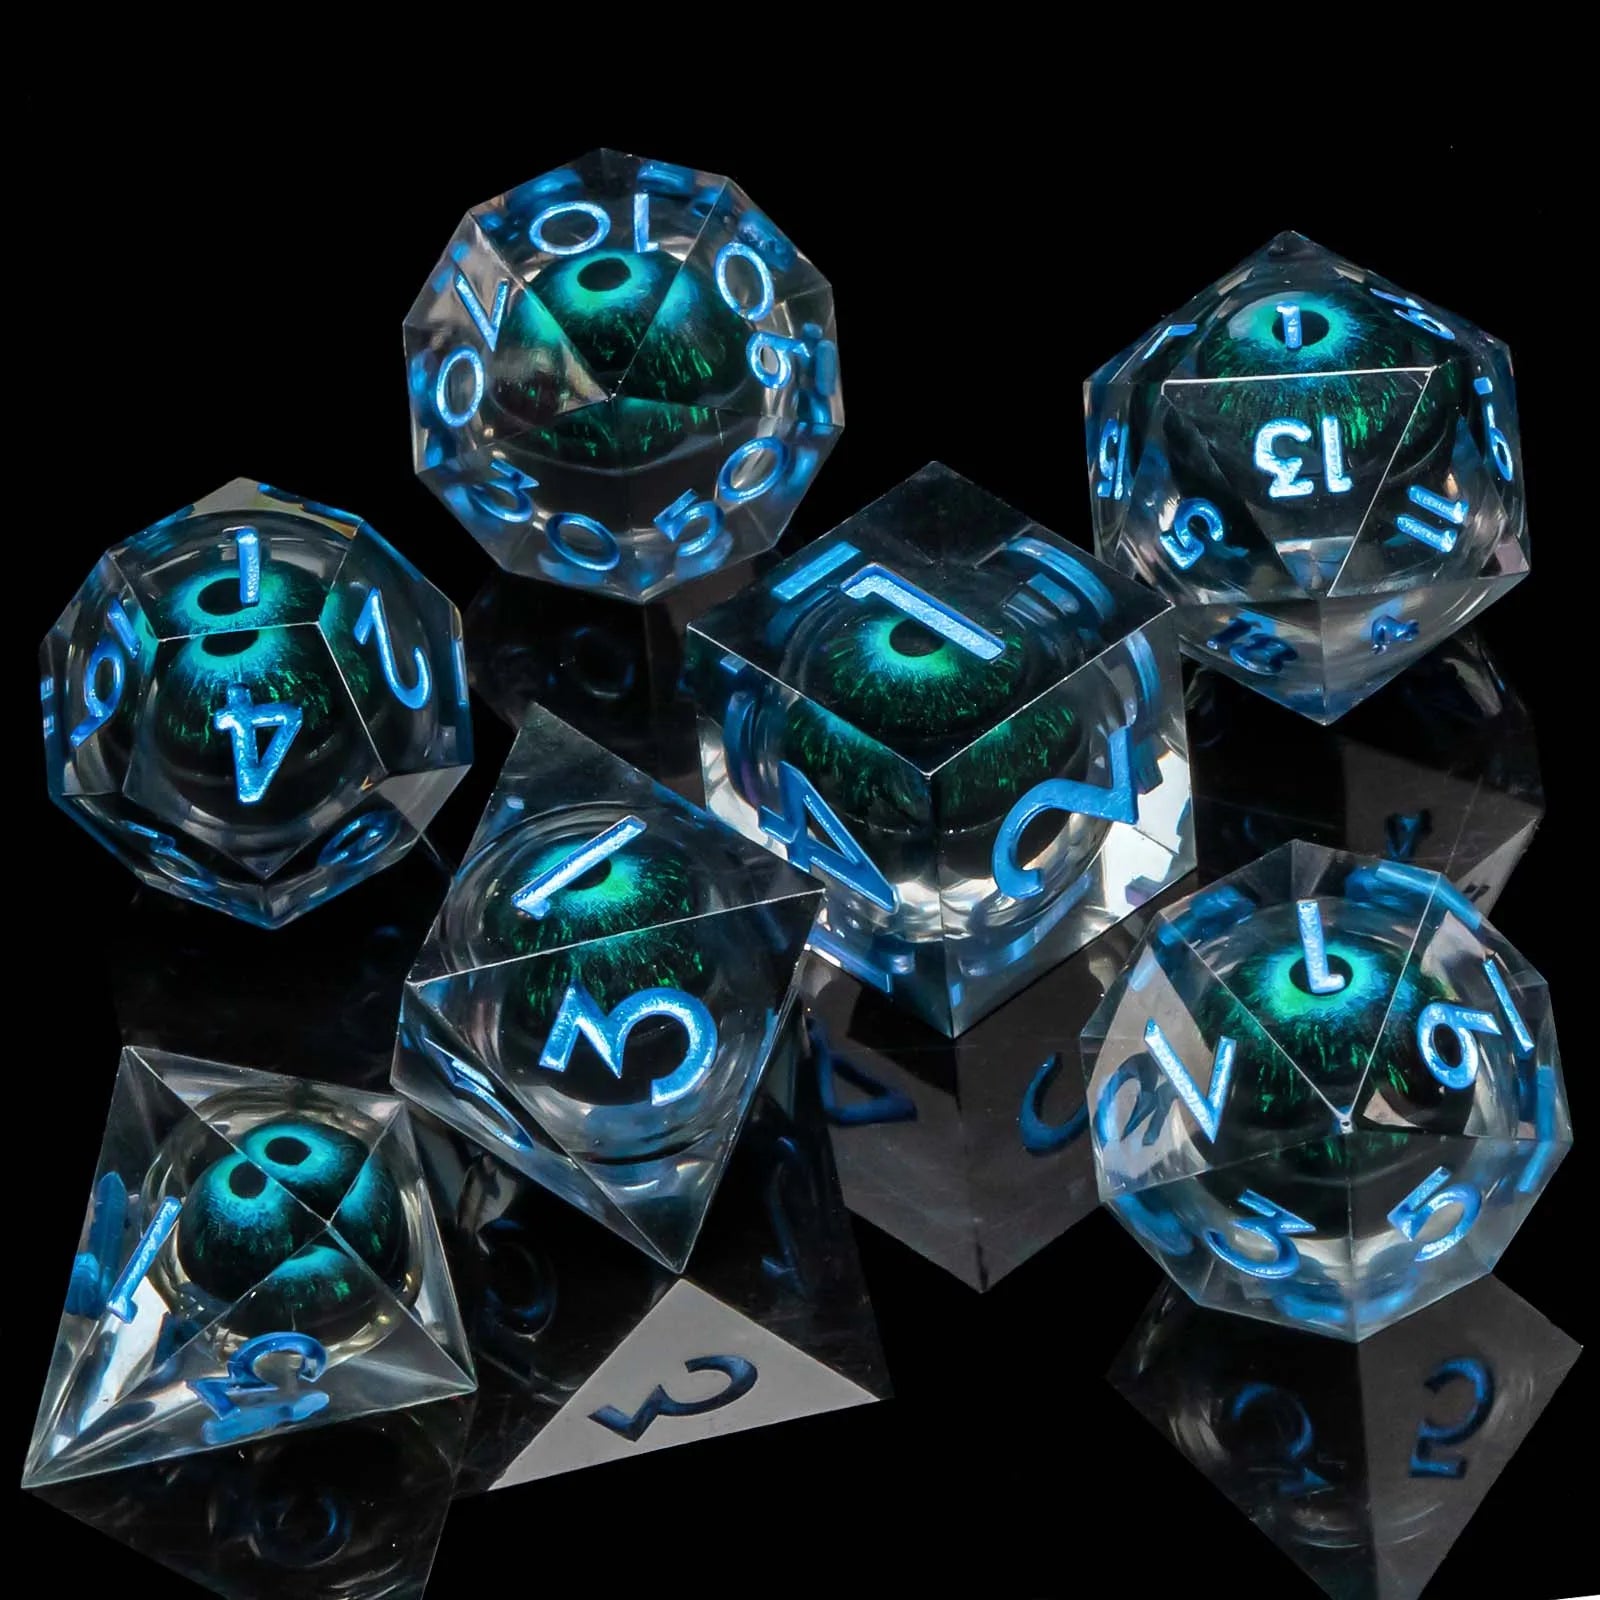 D and D Flowing Sand Sharp Edge Dragon Eye Dnd Resin RPG Polyhedral D&D Dice Set For Dungeon and Dragon Pathfinder Role Playing AZ06